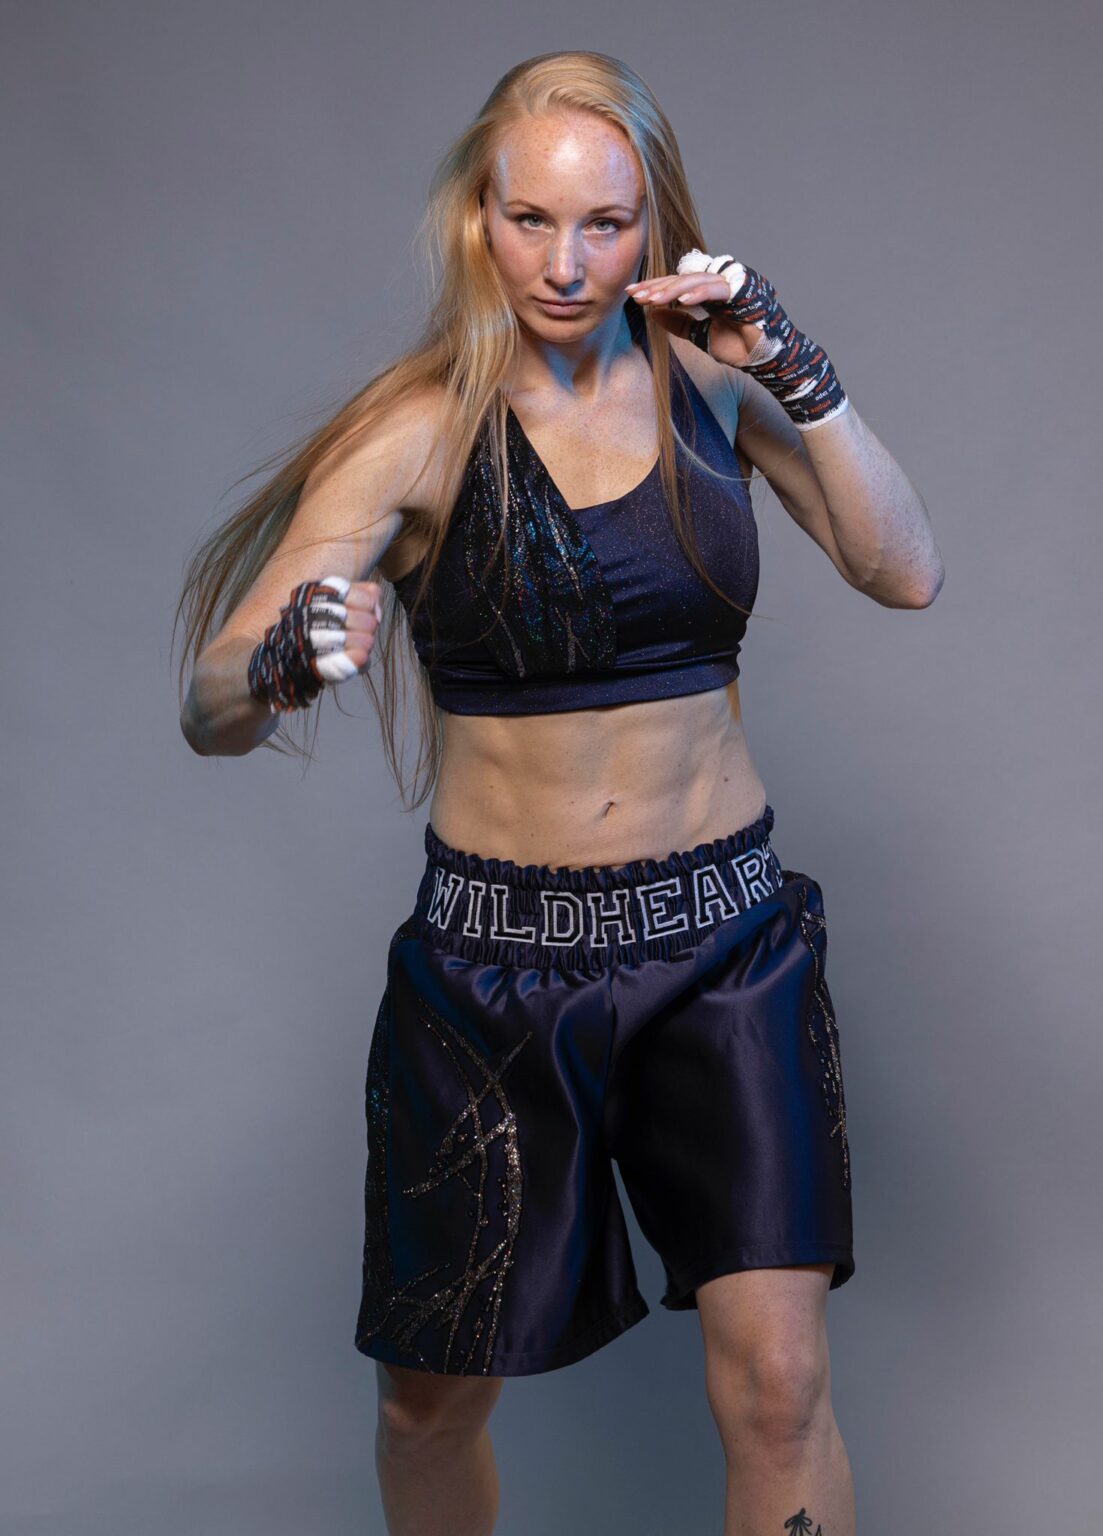 Lucy Wildheart – Professional Boxer